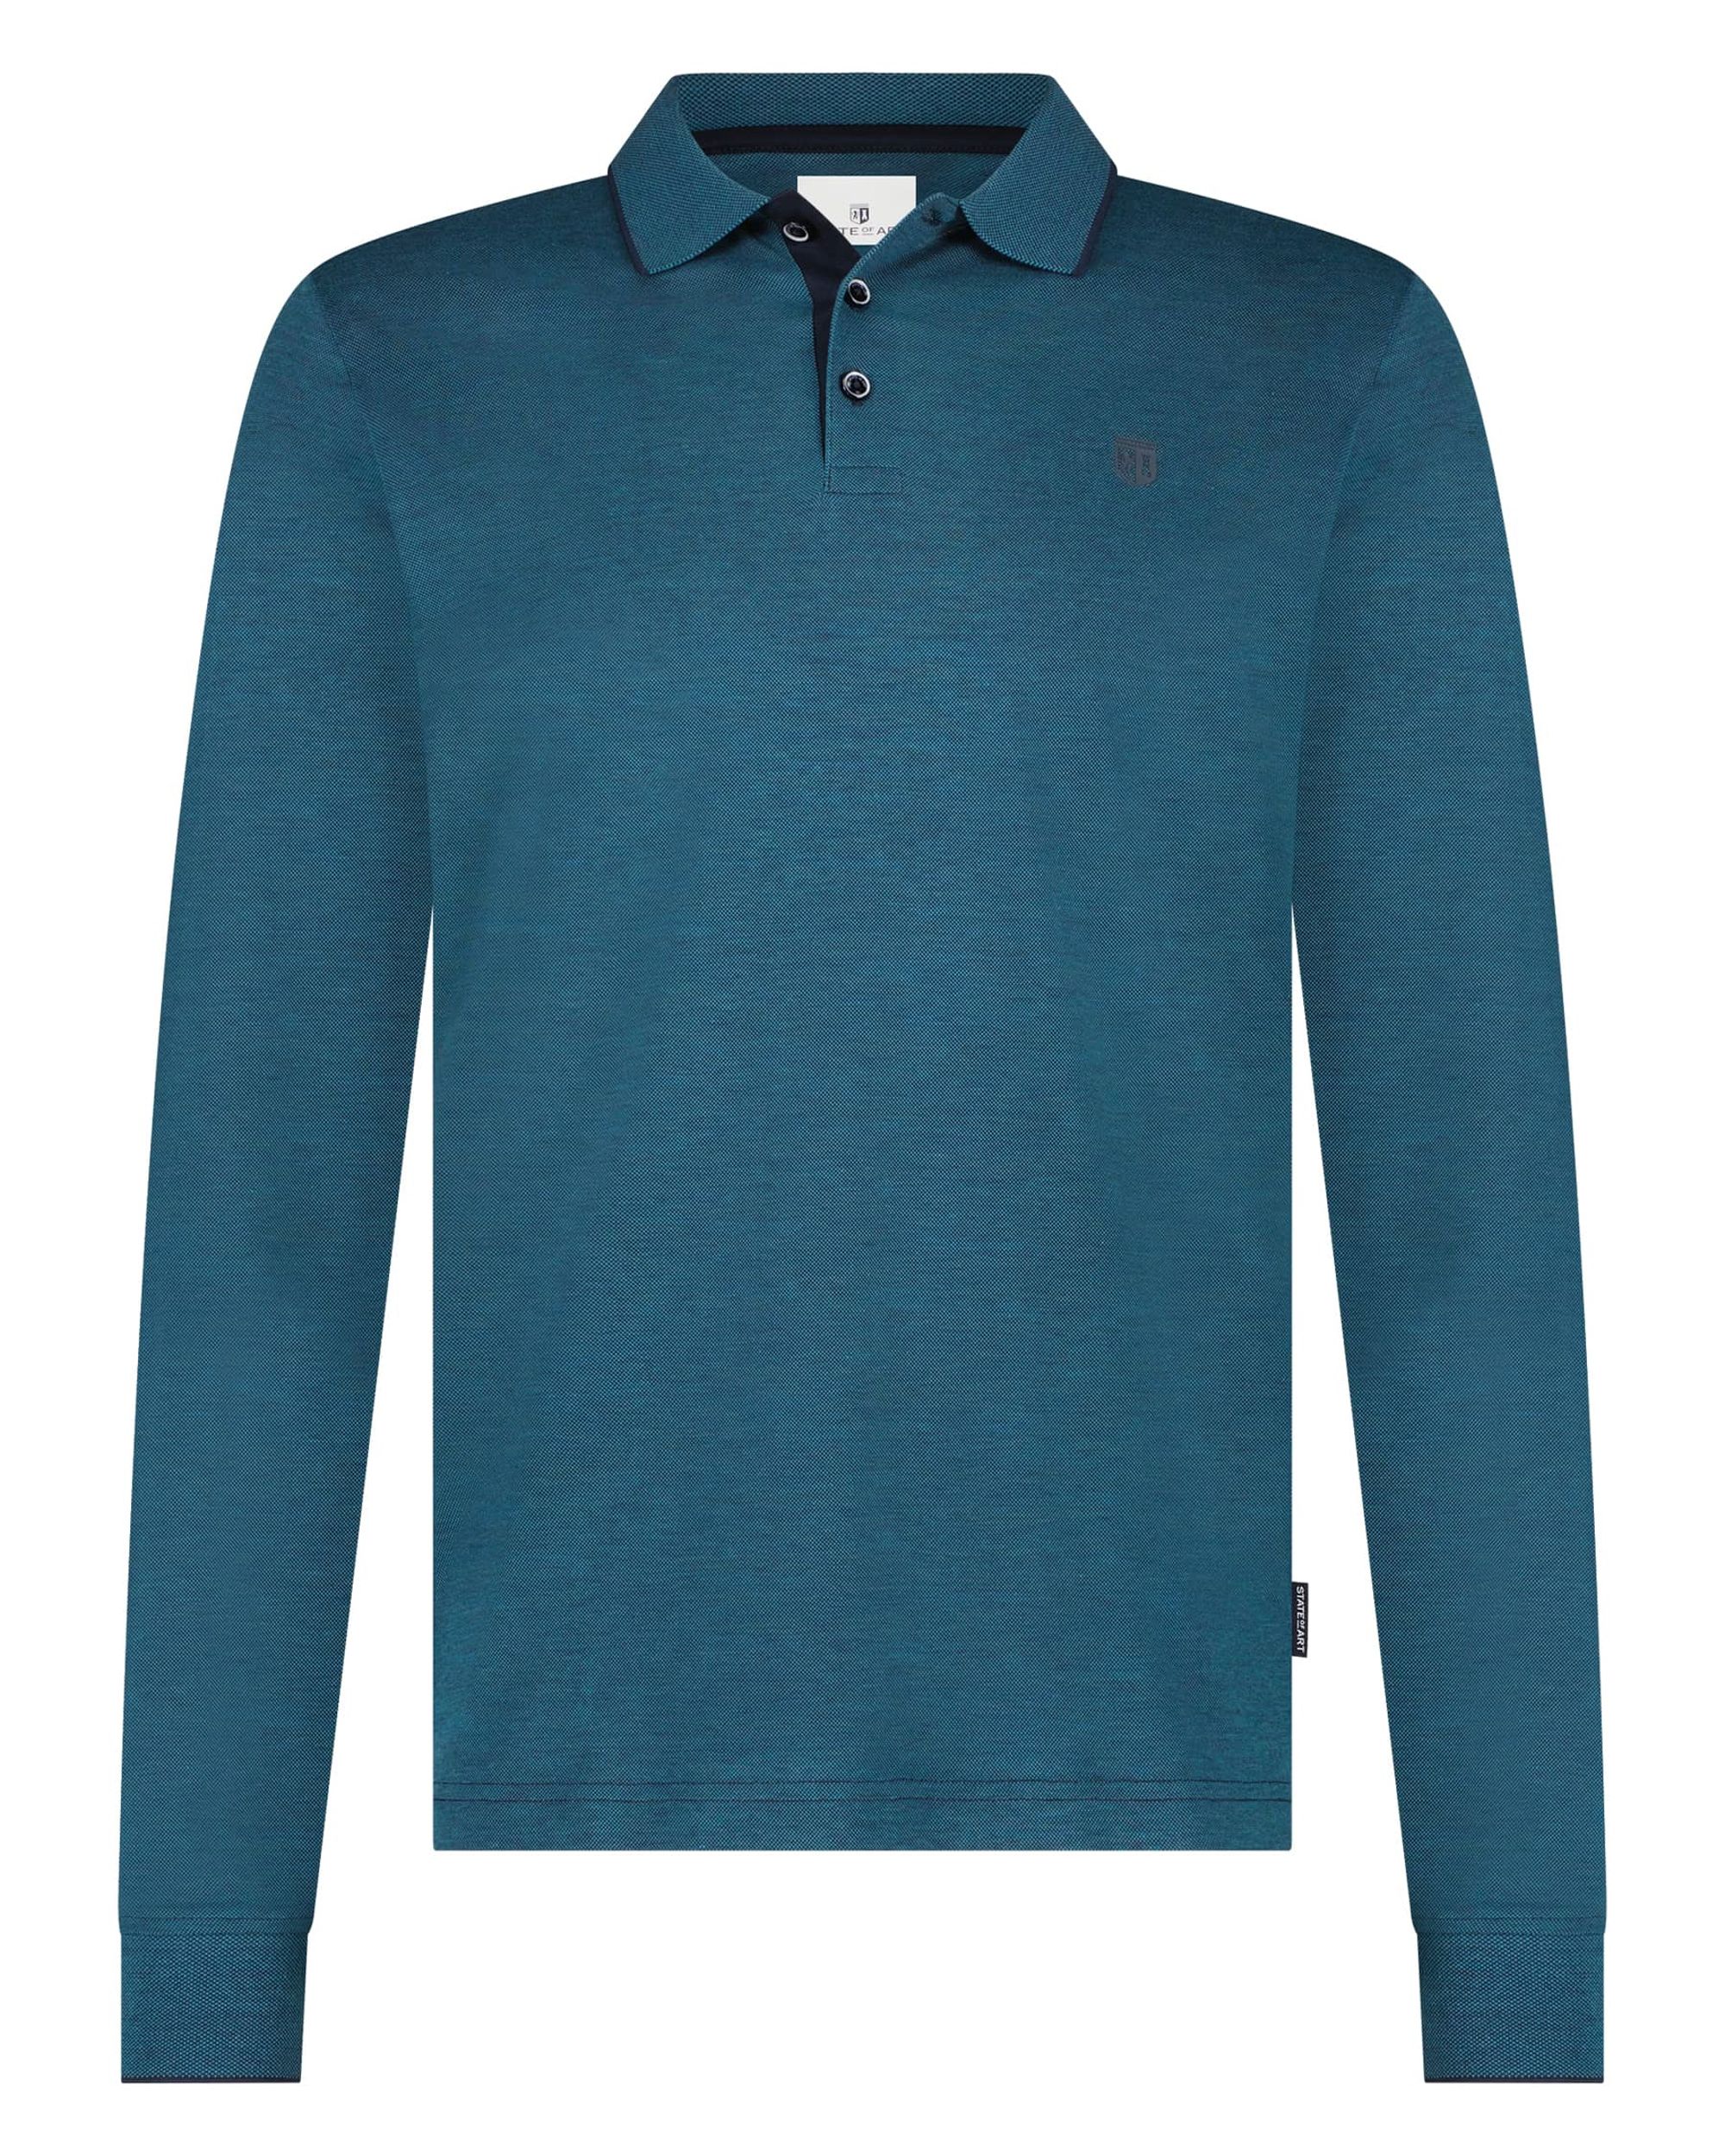 State of Art Polo LM Blauw 091370-001-4XL